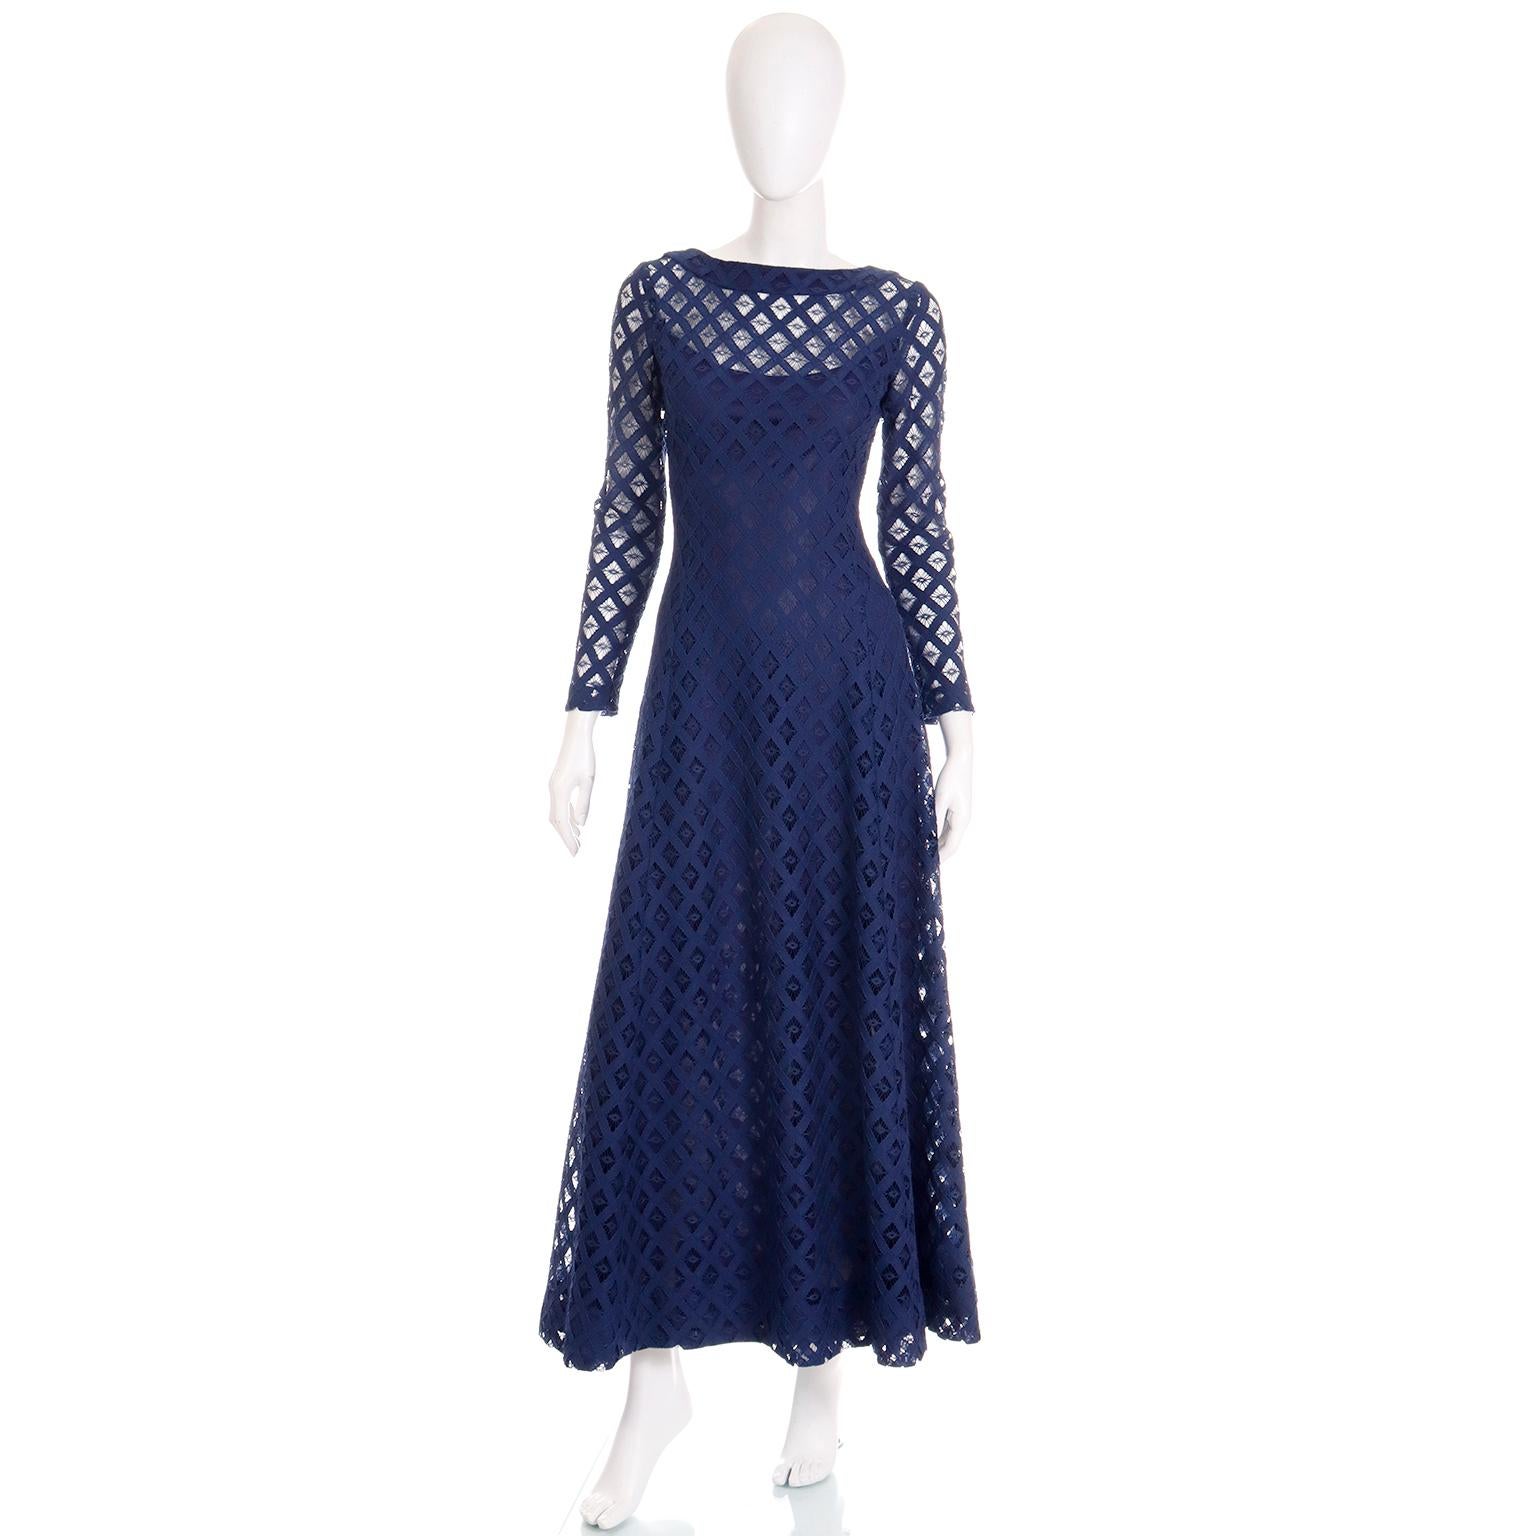 We love this vintage navy blue dress with its cutwork overlay. This pretty cotton dress could be worn during the day or during the evening depending on the accessories chosen to wear with the dress.  The sleeves and upper bodice are sheer and there